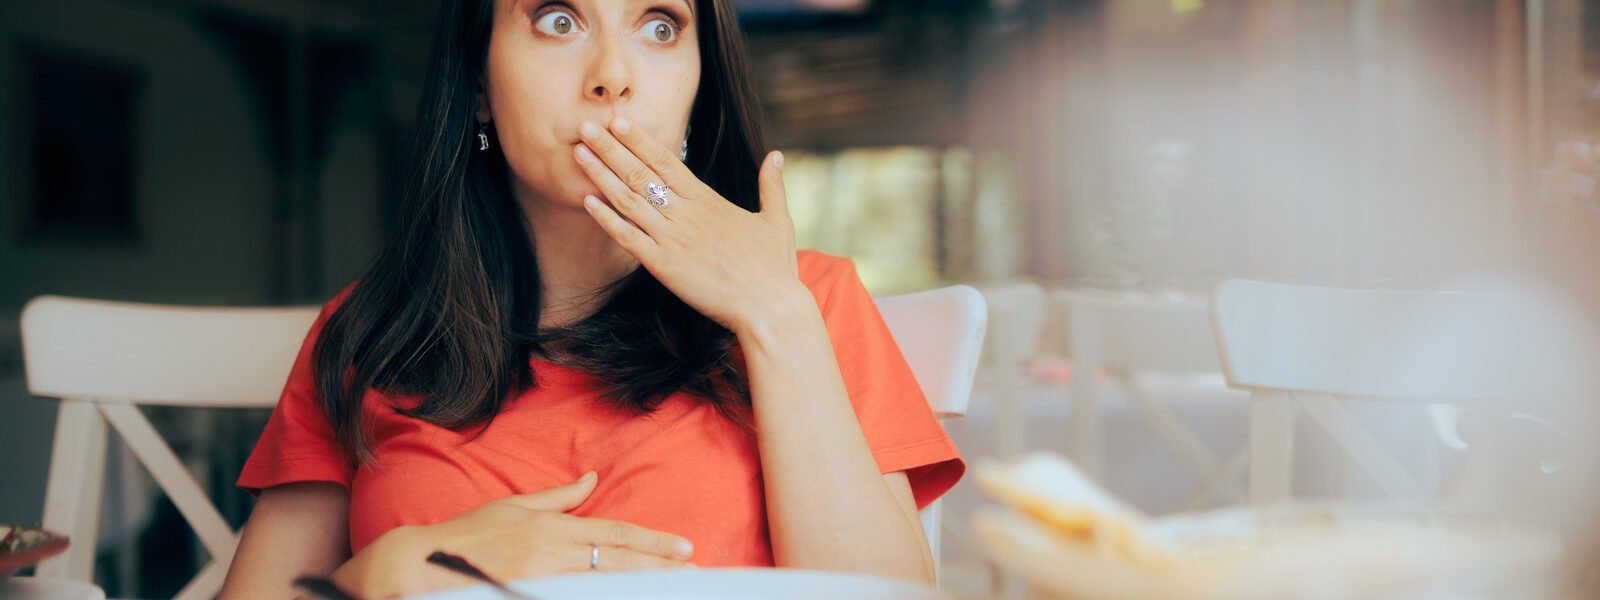 Eating This Popular Carb Could Trigger An Annoying Case Of The Hiccups - Health Digest